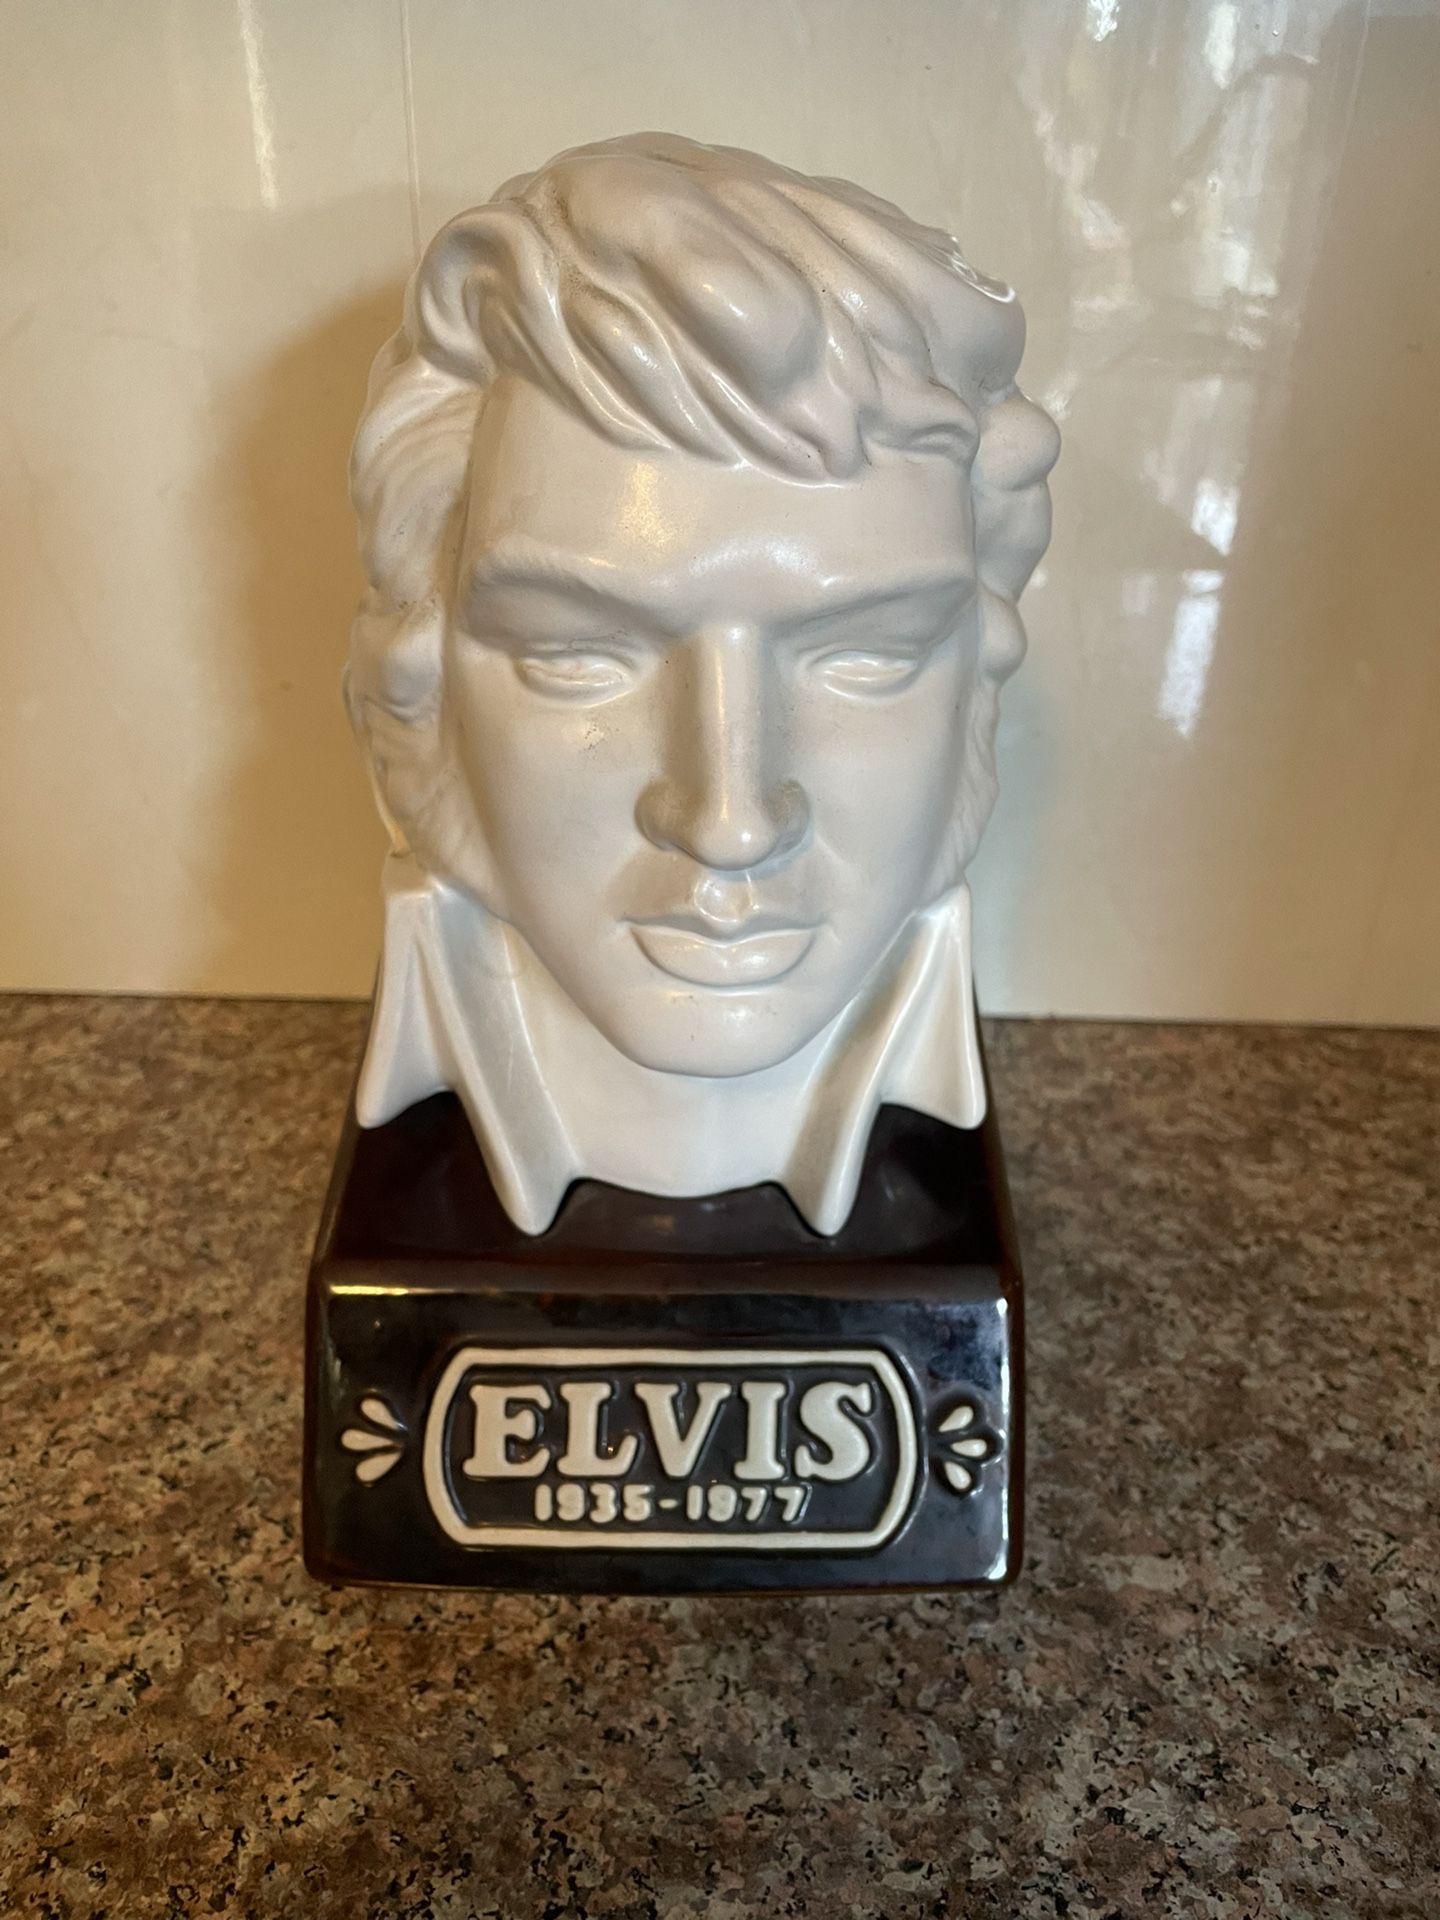 EMPTY ELVIS PRESLEY 1(contact info removed) McCormick Distilling Co. Decanter  BUST HEAD VTG